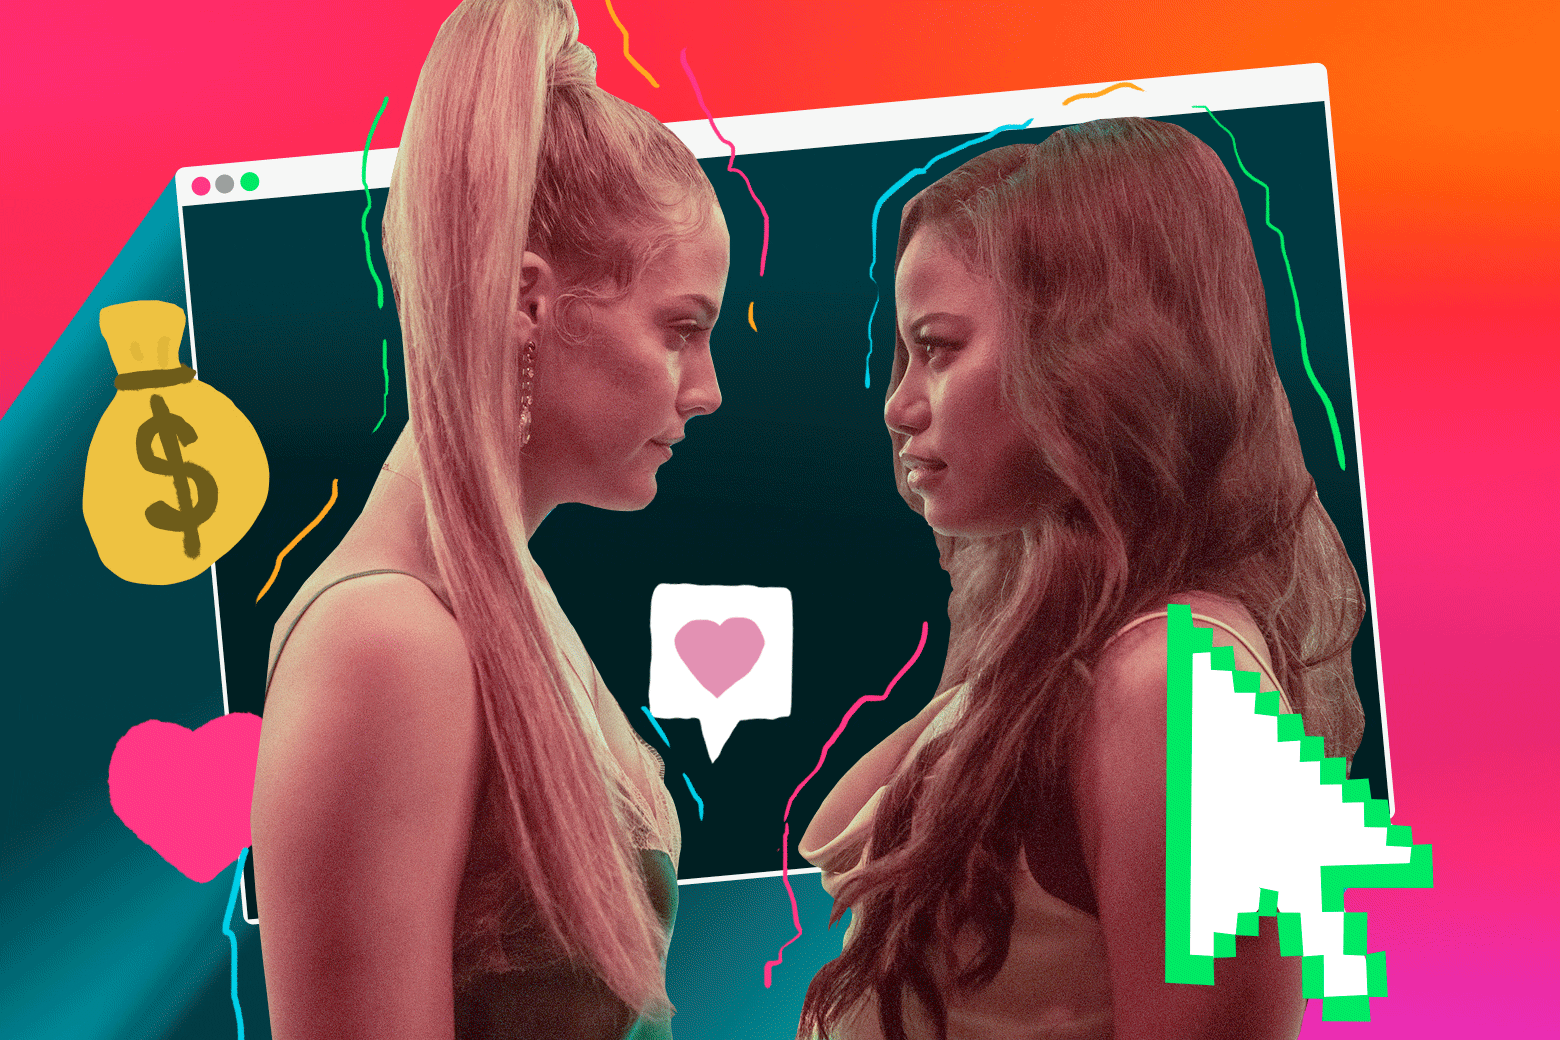 Riley Keough and Taylor Paige in Zola, surrounded by animated heart and money bags emojis